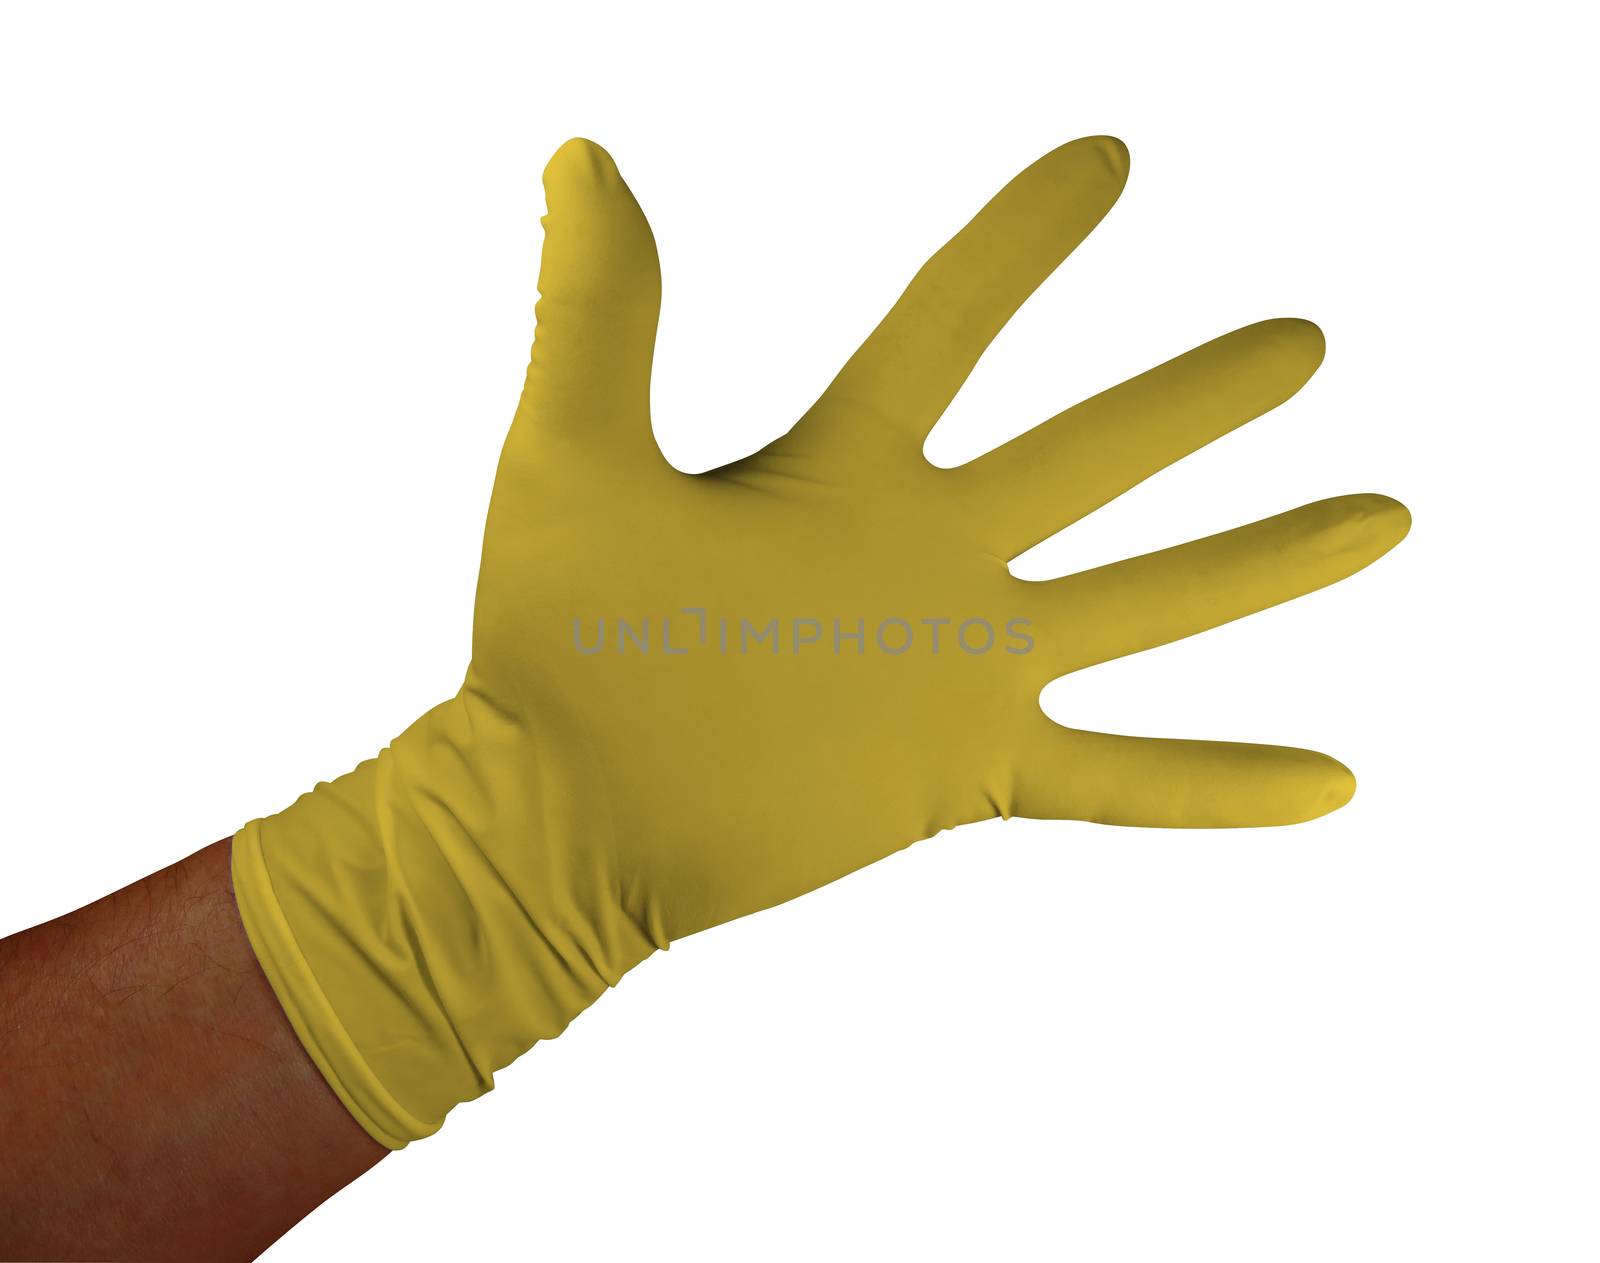 Yellow medical rubber gloves, isolated on white background. Clipping Path included.